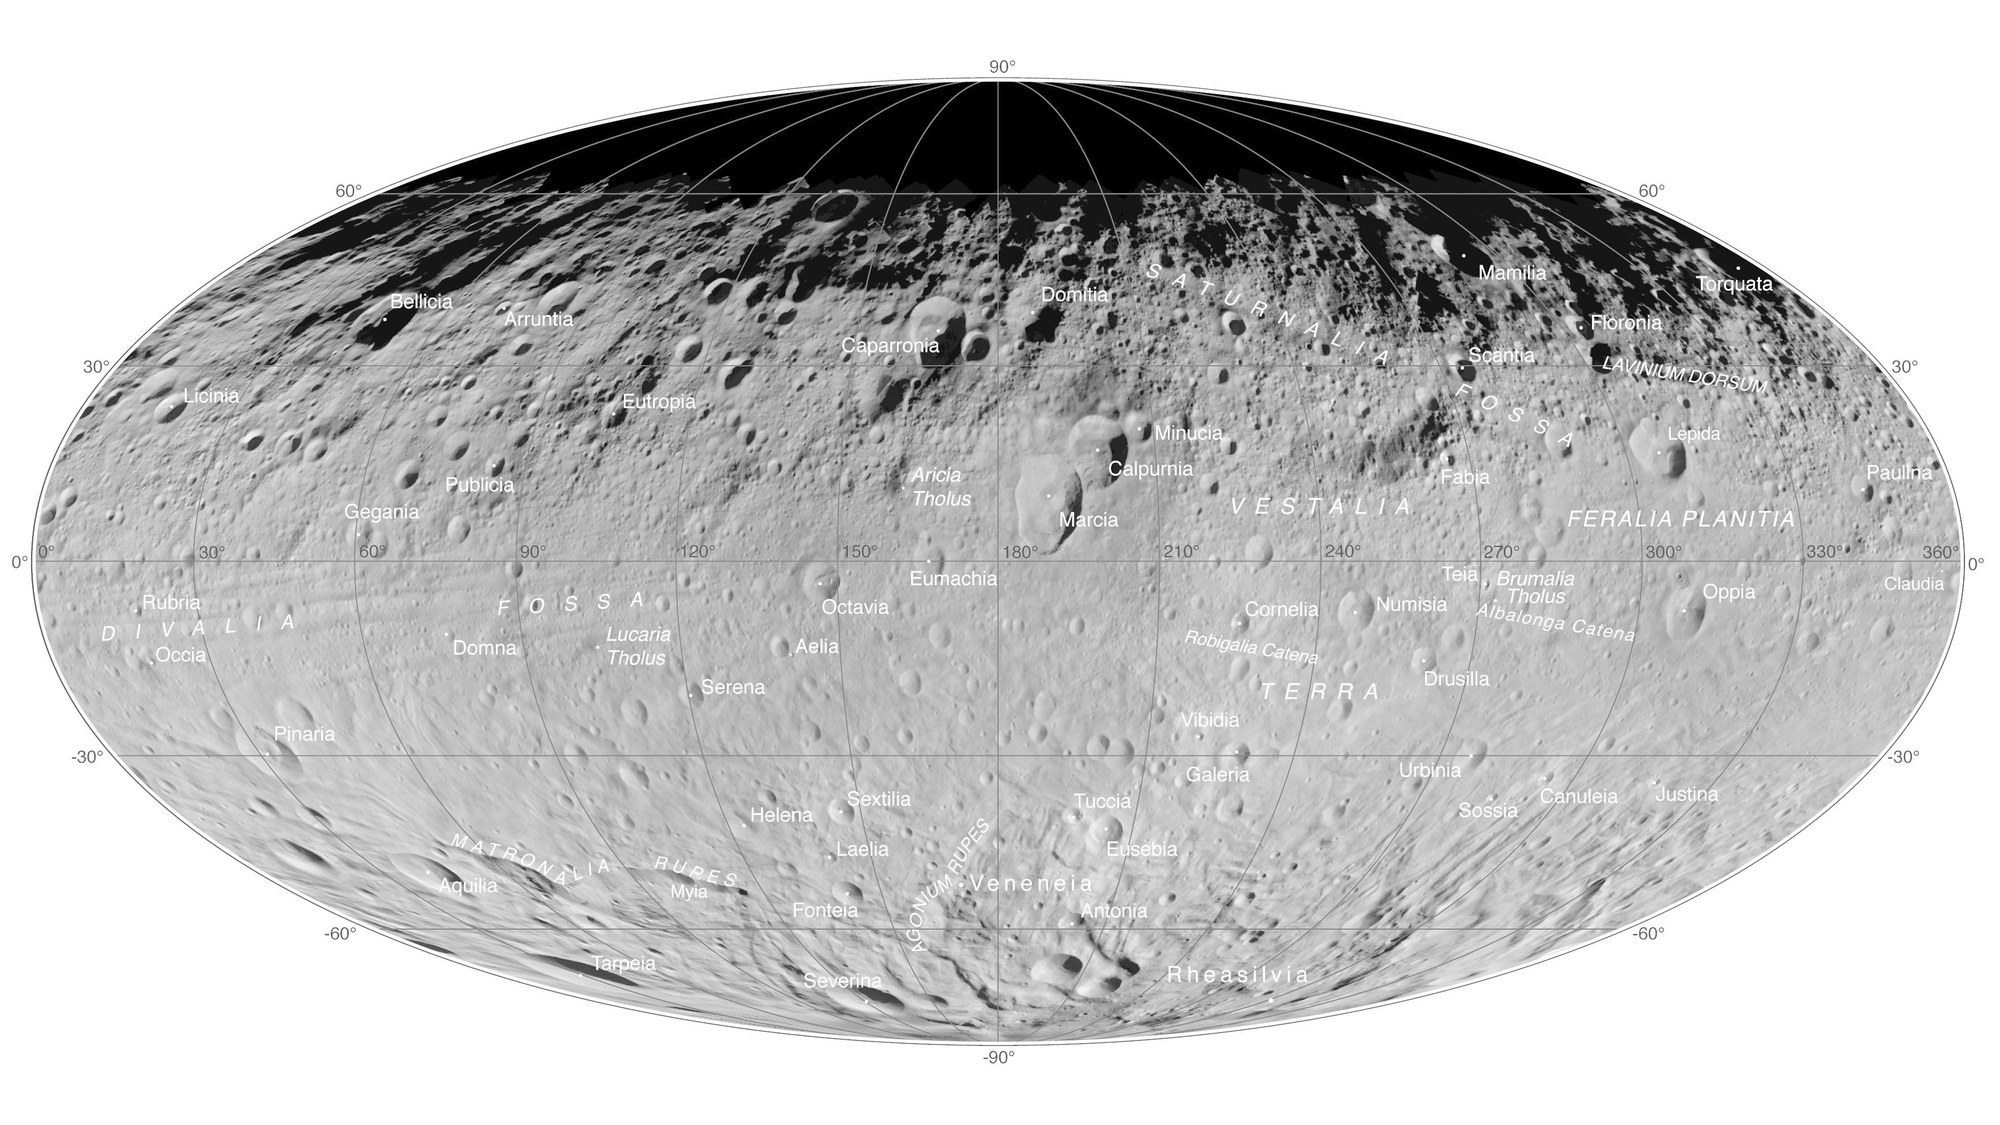 Overview of the asteroid Vesta